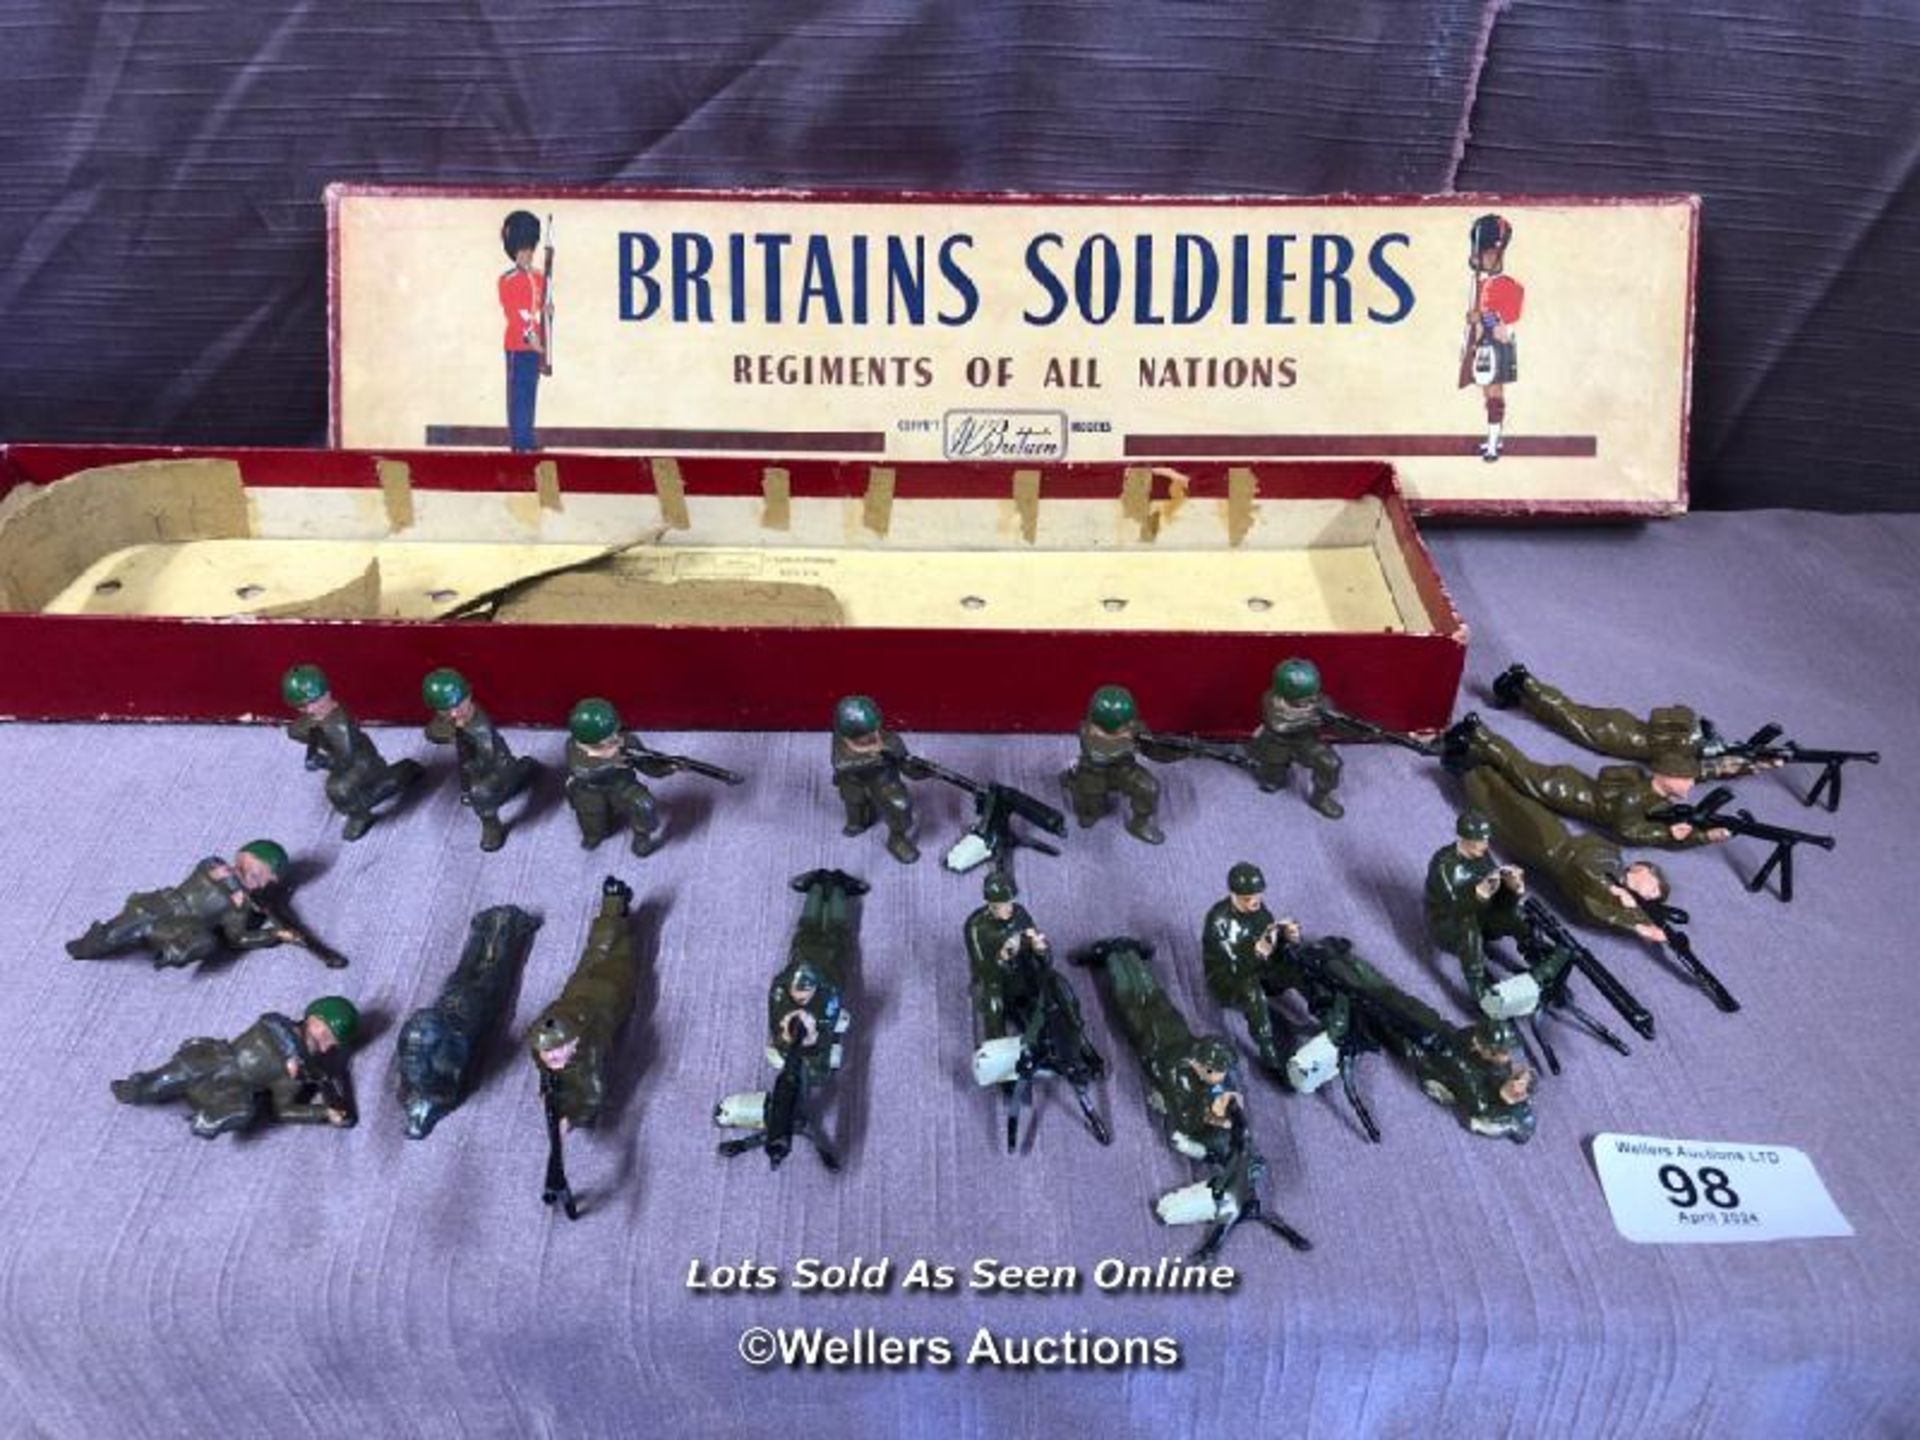 BRITAINS SOLDIERS REGIMENTS OF ALL NATIONS, WITH A NON MATCHING BOX NO. 2063 THE ARGYLL AND